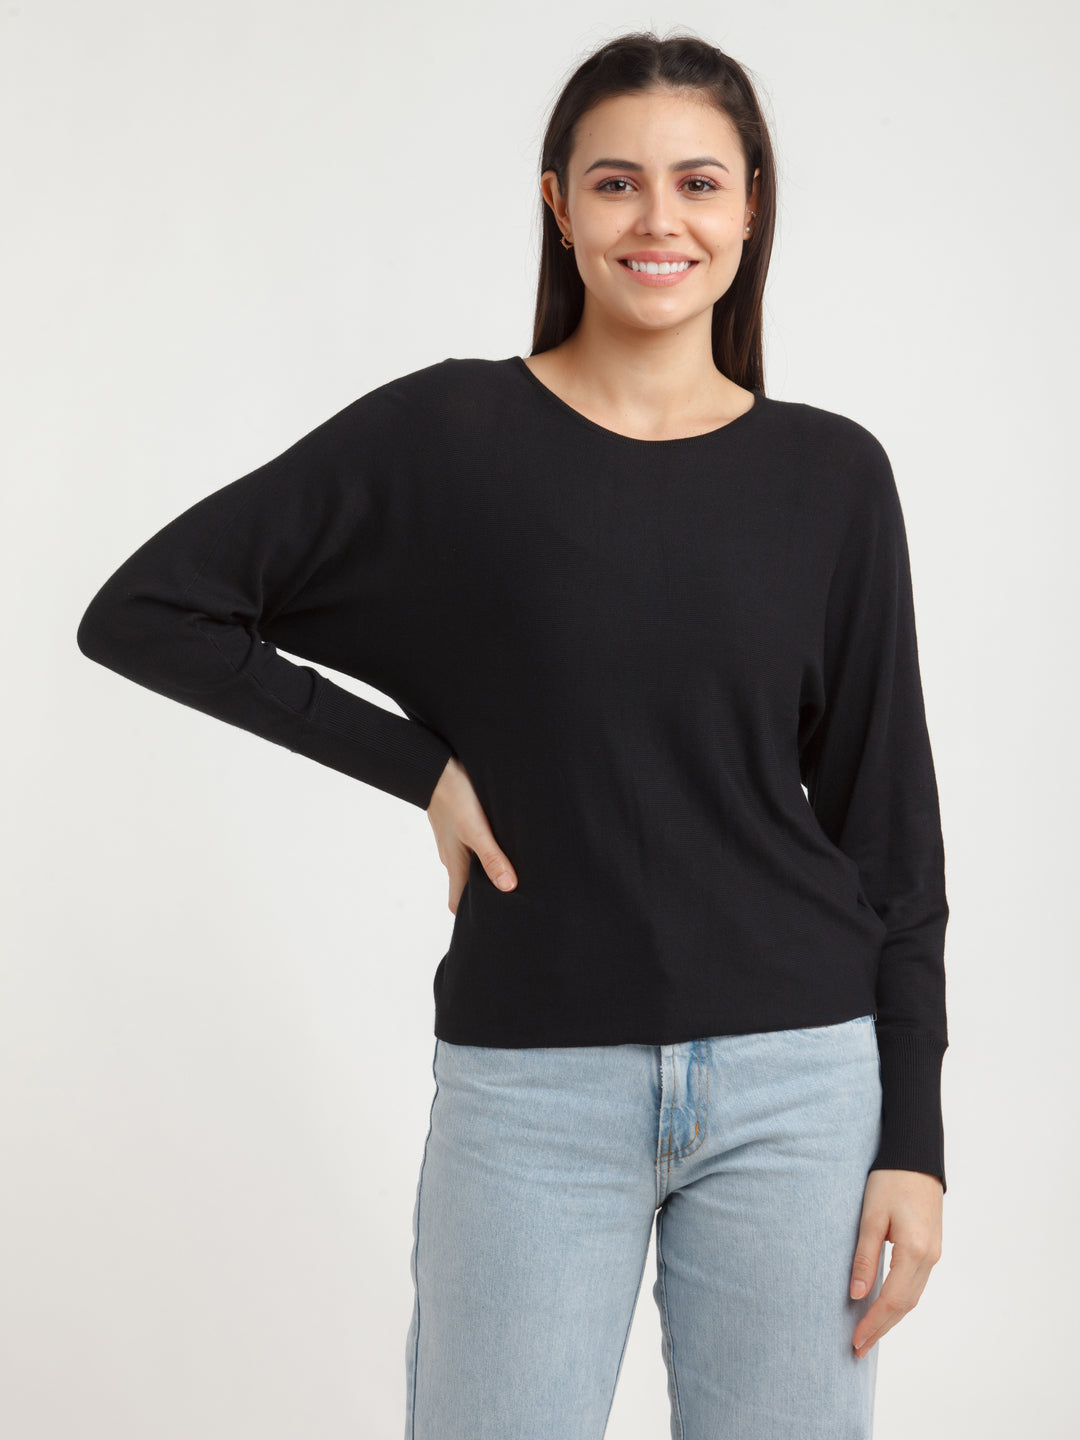 Black Solid Sweater For Women